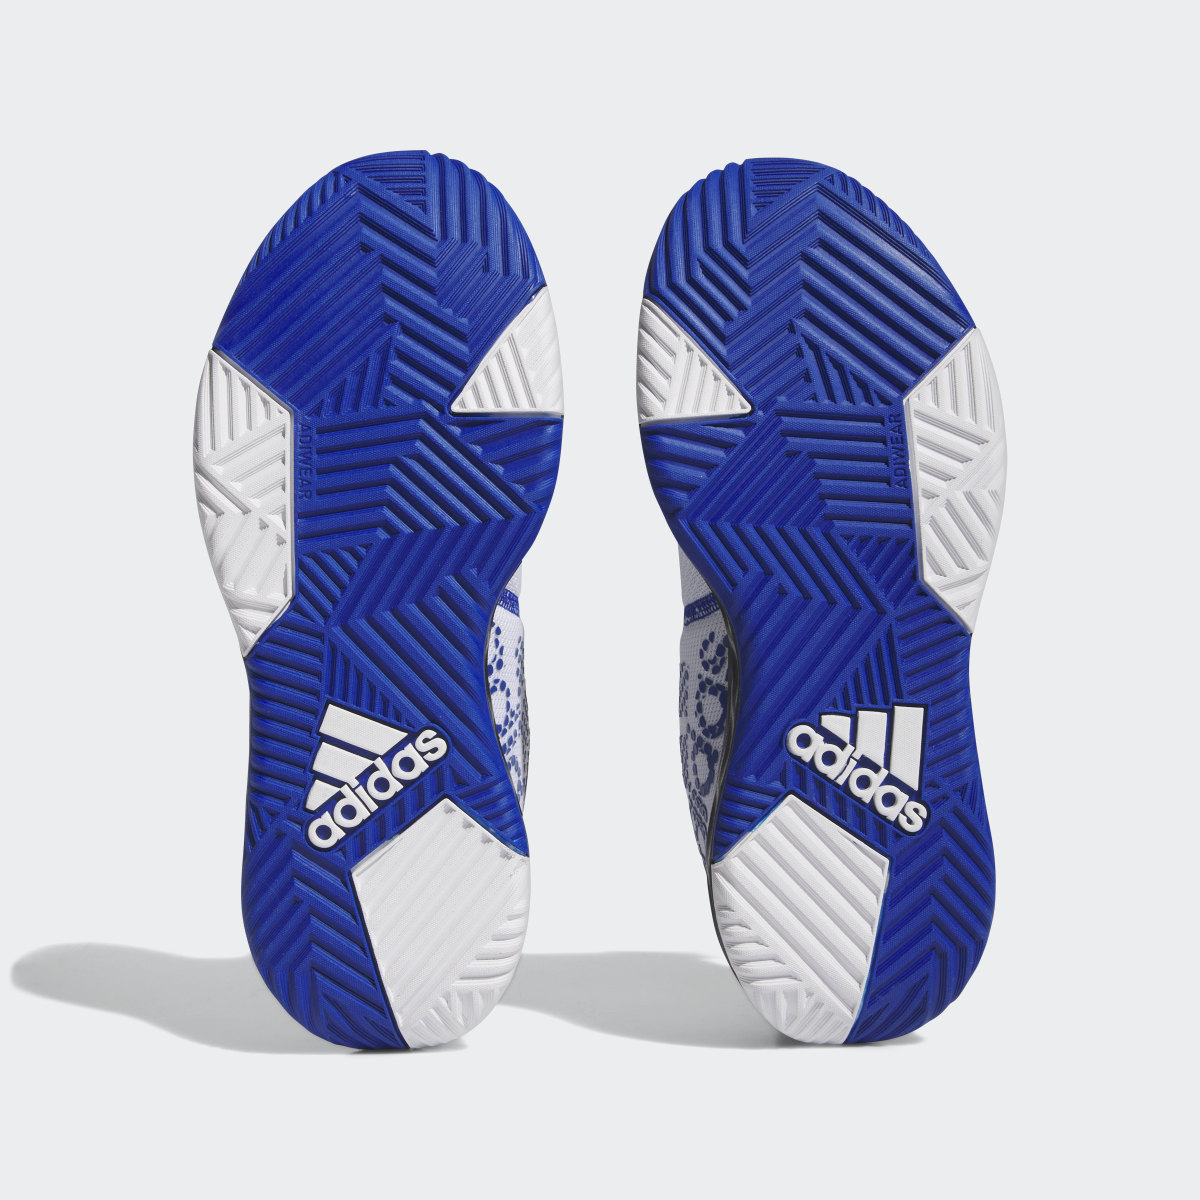 Adidas Ownthegame Shoes. 4